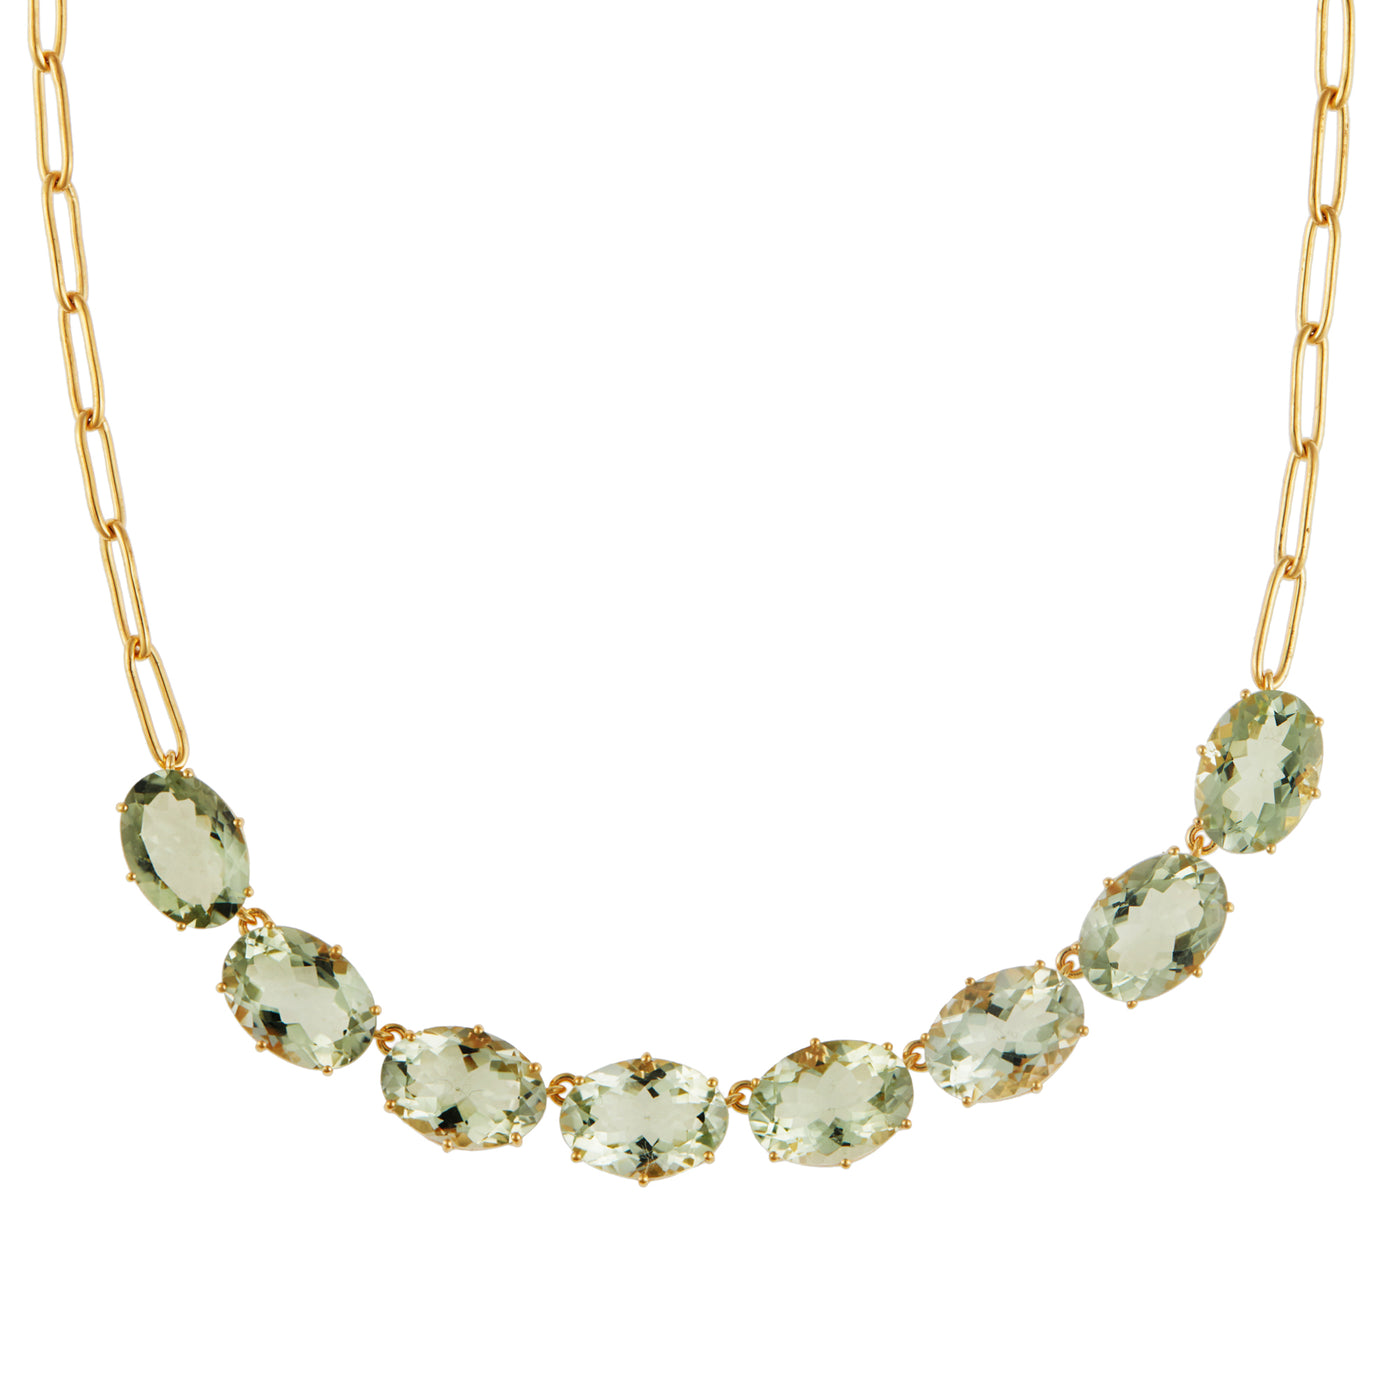 Chained Crown Necklace Green Amethyst - Crown - Ileana Makri store